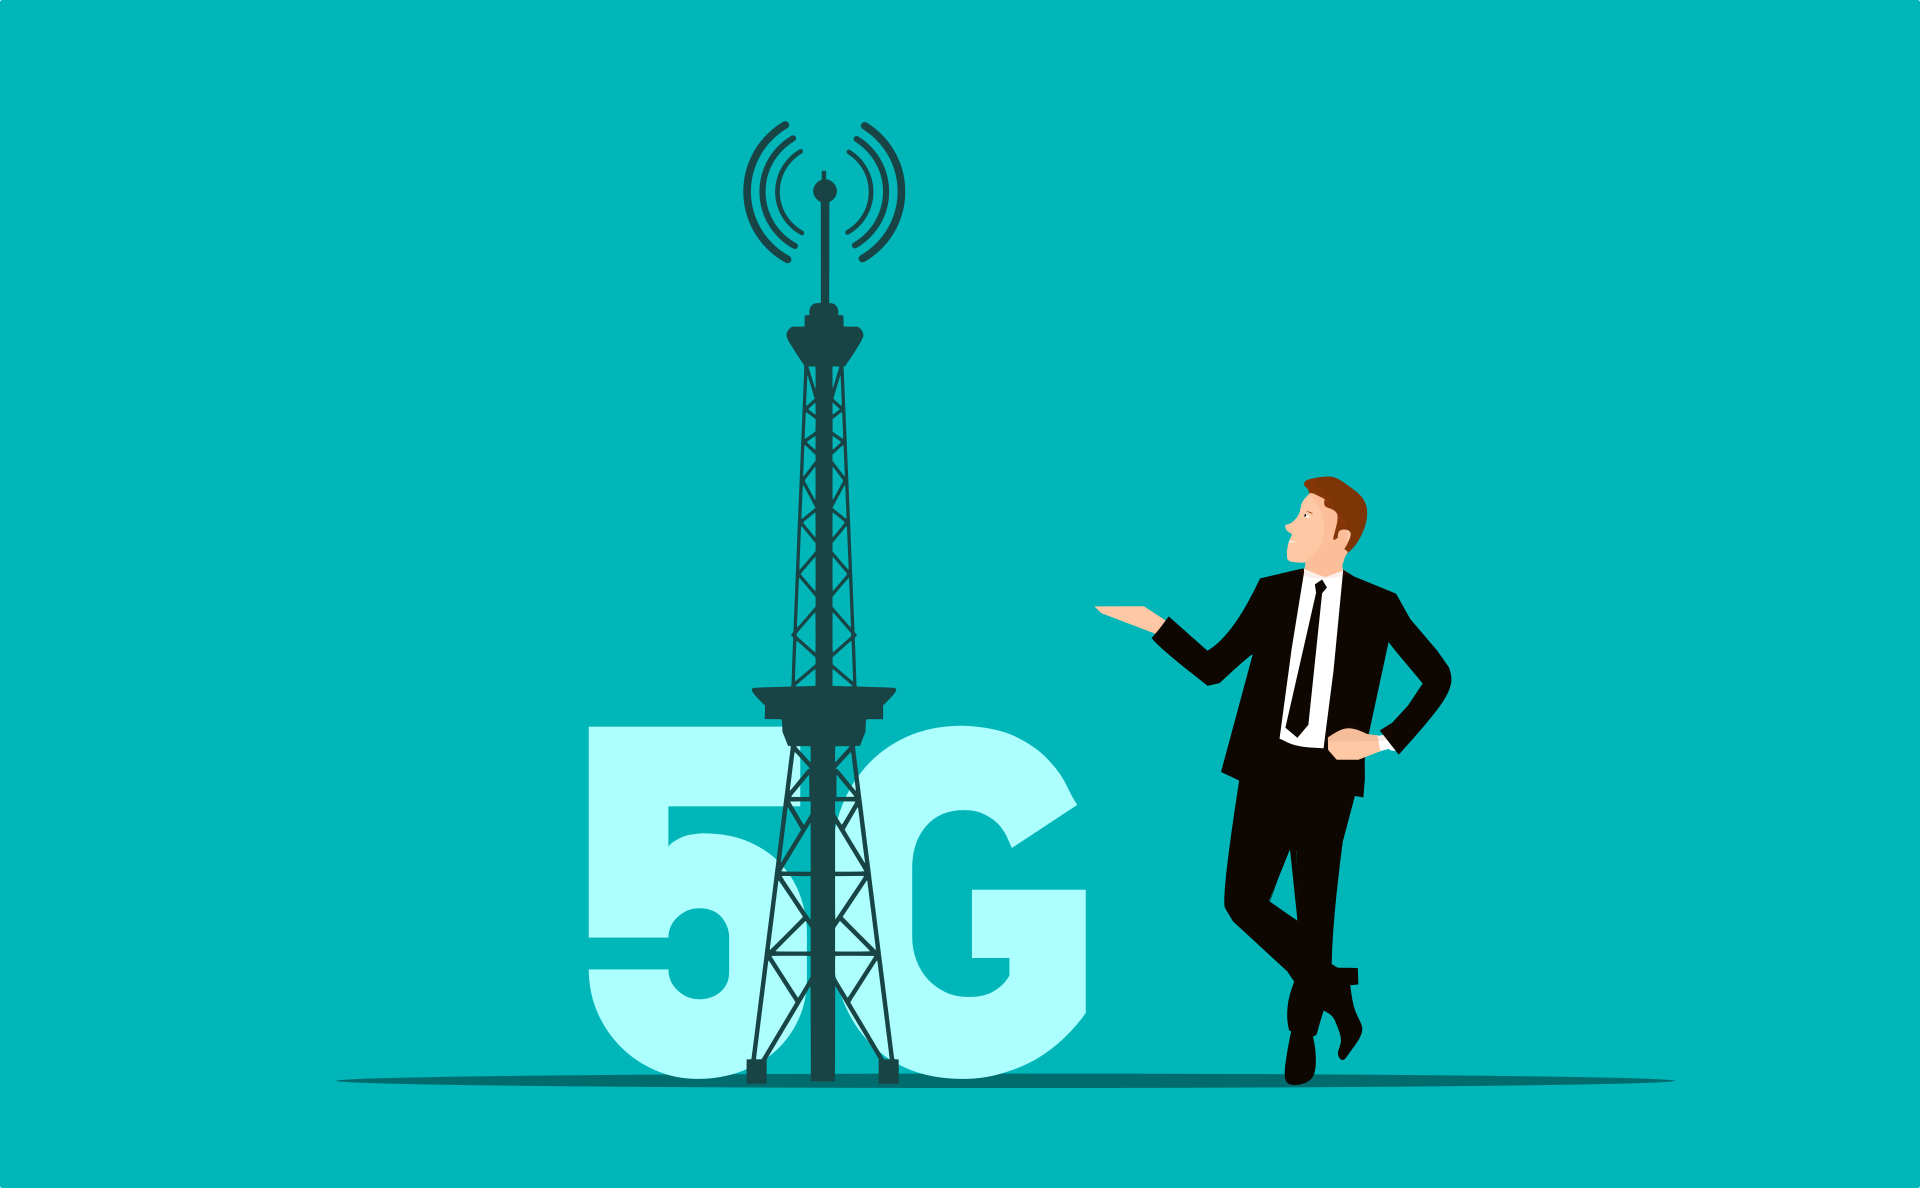 What is a 5G Tower?